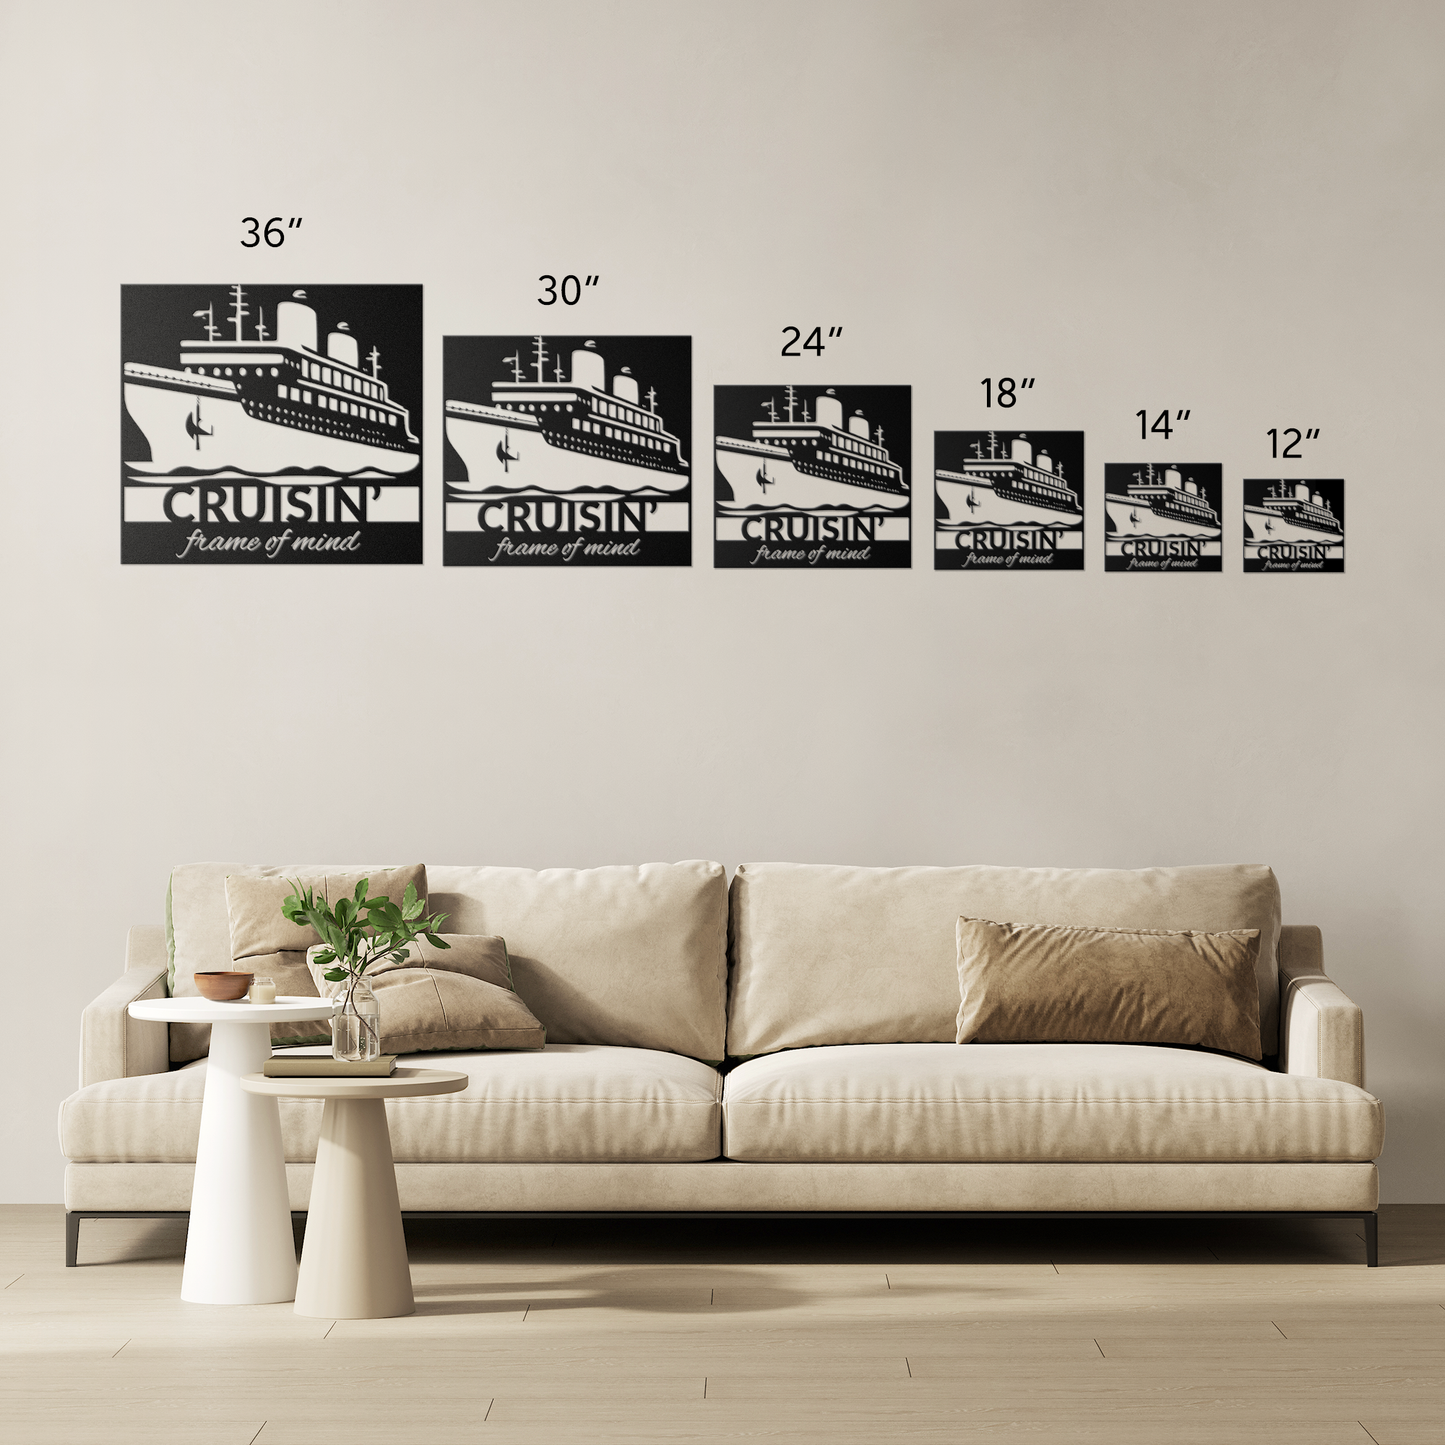 Cruise Ship Metal Wall Art Decor - Display Your Love of Cruises With This Fun Metal Sign